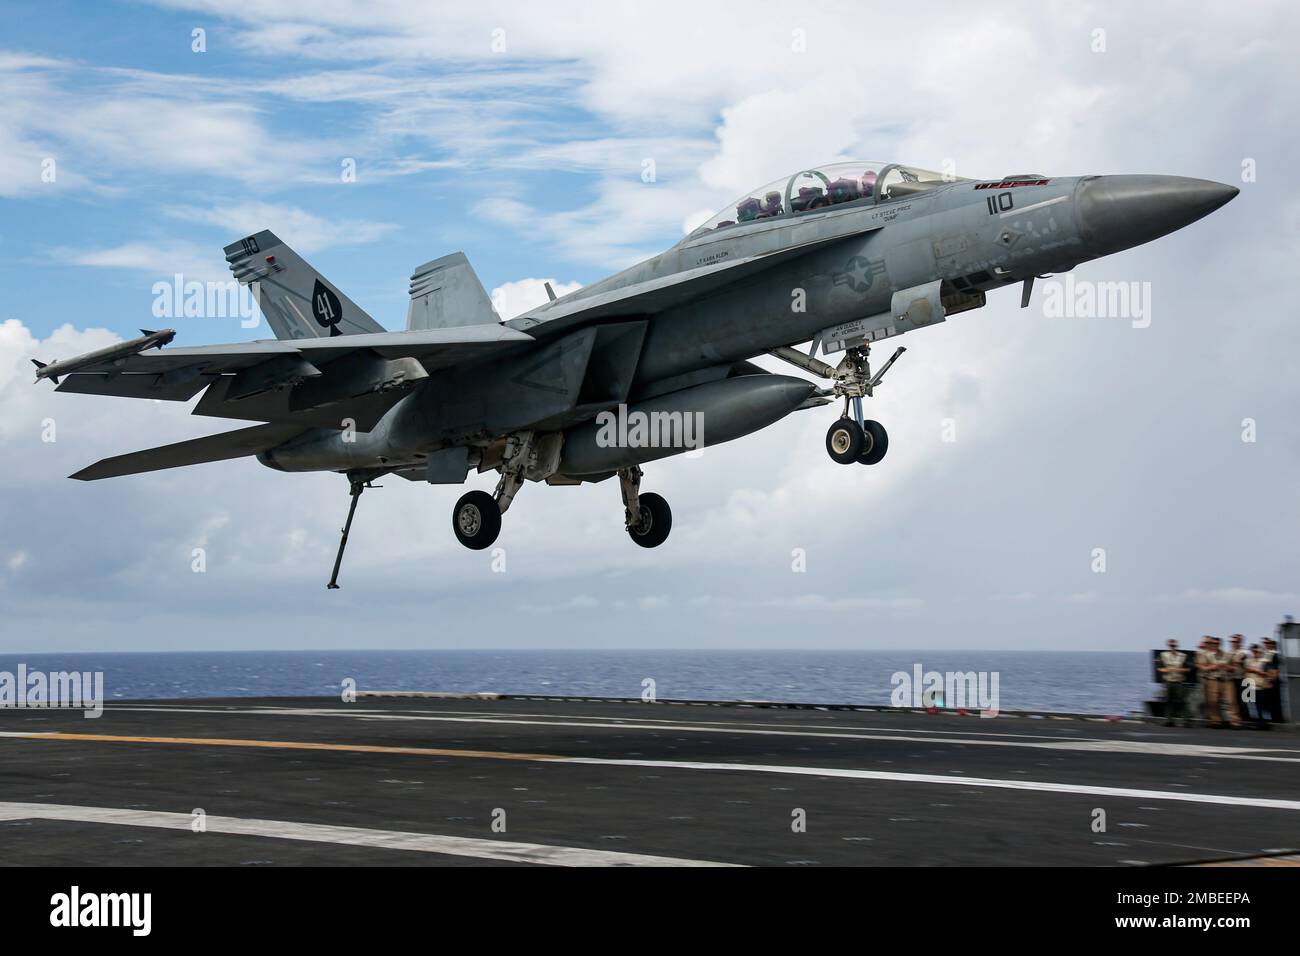 PHILIPPINE SEA (June 15, 2022) An F/A-18F Super Hornet, assigned to the 'Black Aces' of Strike Fighter Squadron (VFA) 41, prepares to make an arrested landing on the flight deck of the Nimitz-class aircraft carrier USS Abraham Lincoln (CVN 72). Abraham Lincoln Strike Group is on a scheduled deployment in the U.S. 7th Fleet area of operations to enhance interoperability through alliances and partnerships while serving as a ready-response force in support of a free and open Indo-Pacific region. Stock Photo